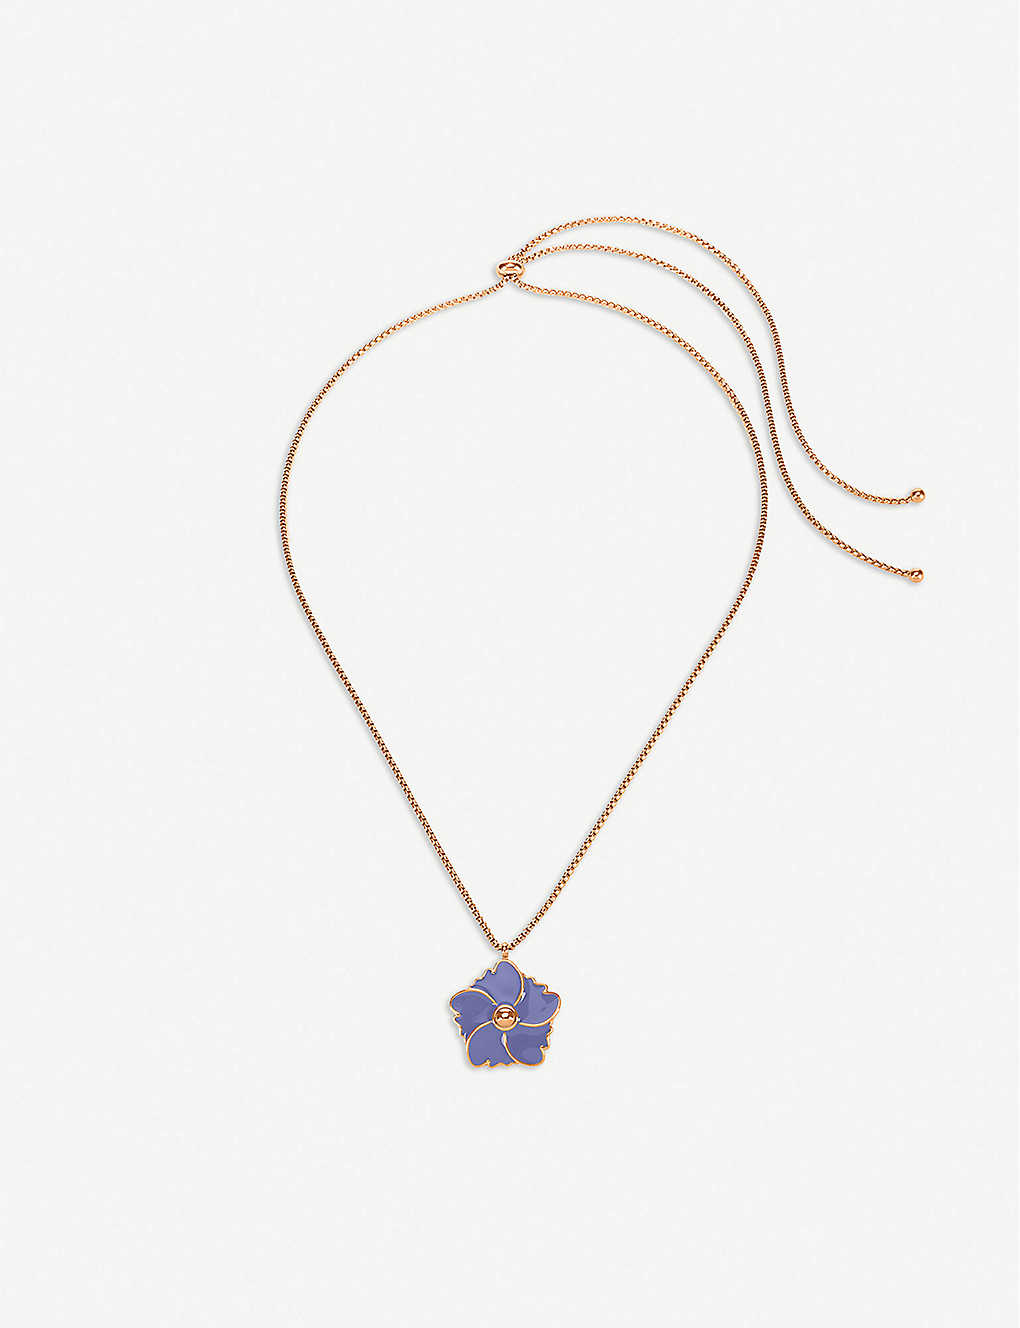 Bloom Bliss rose gold-plated necklace - Rose gold